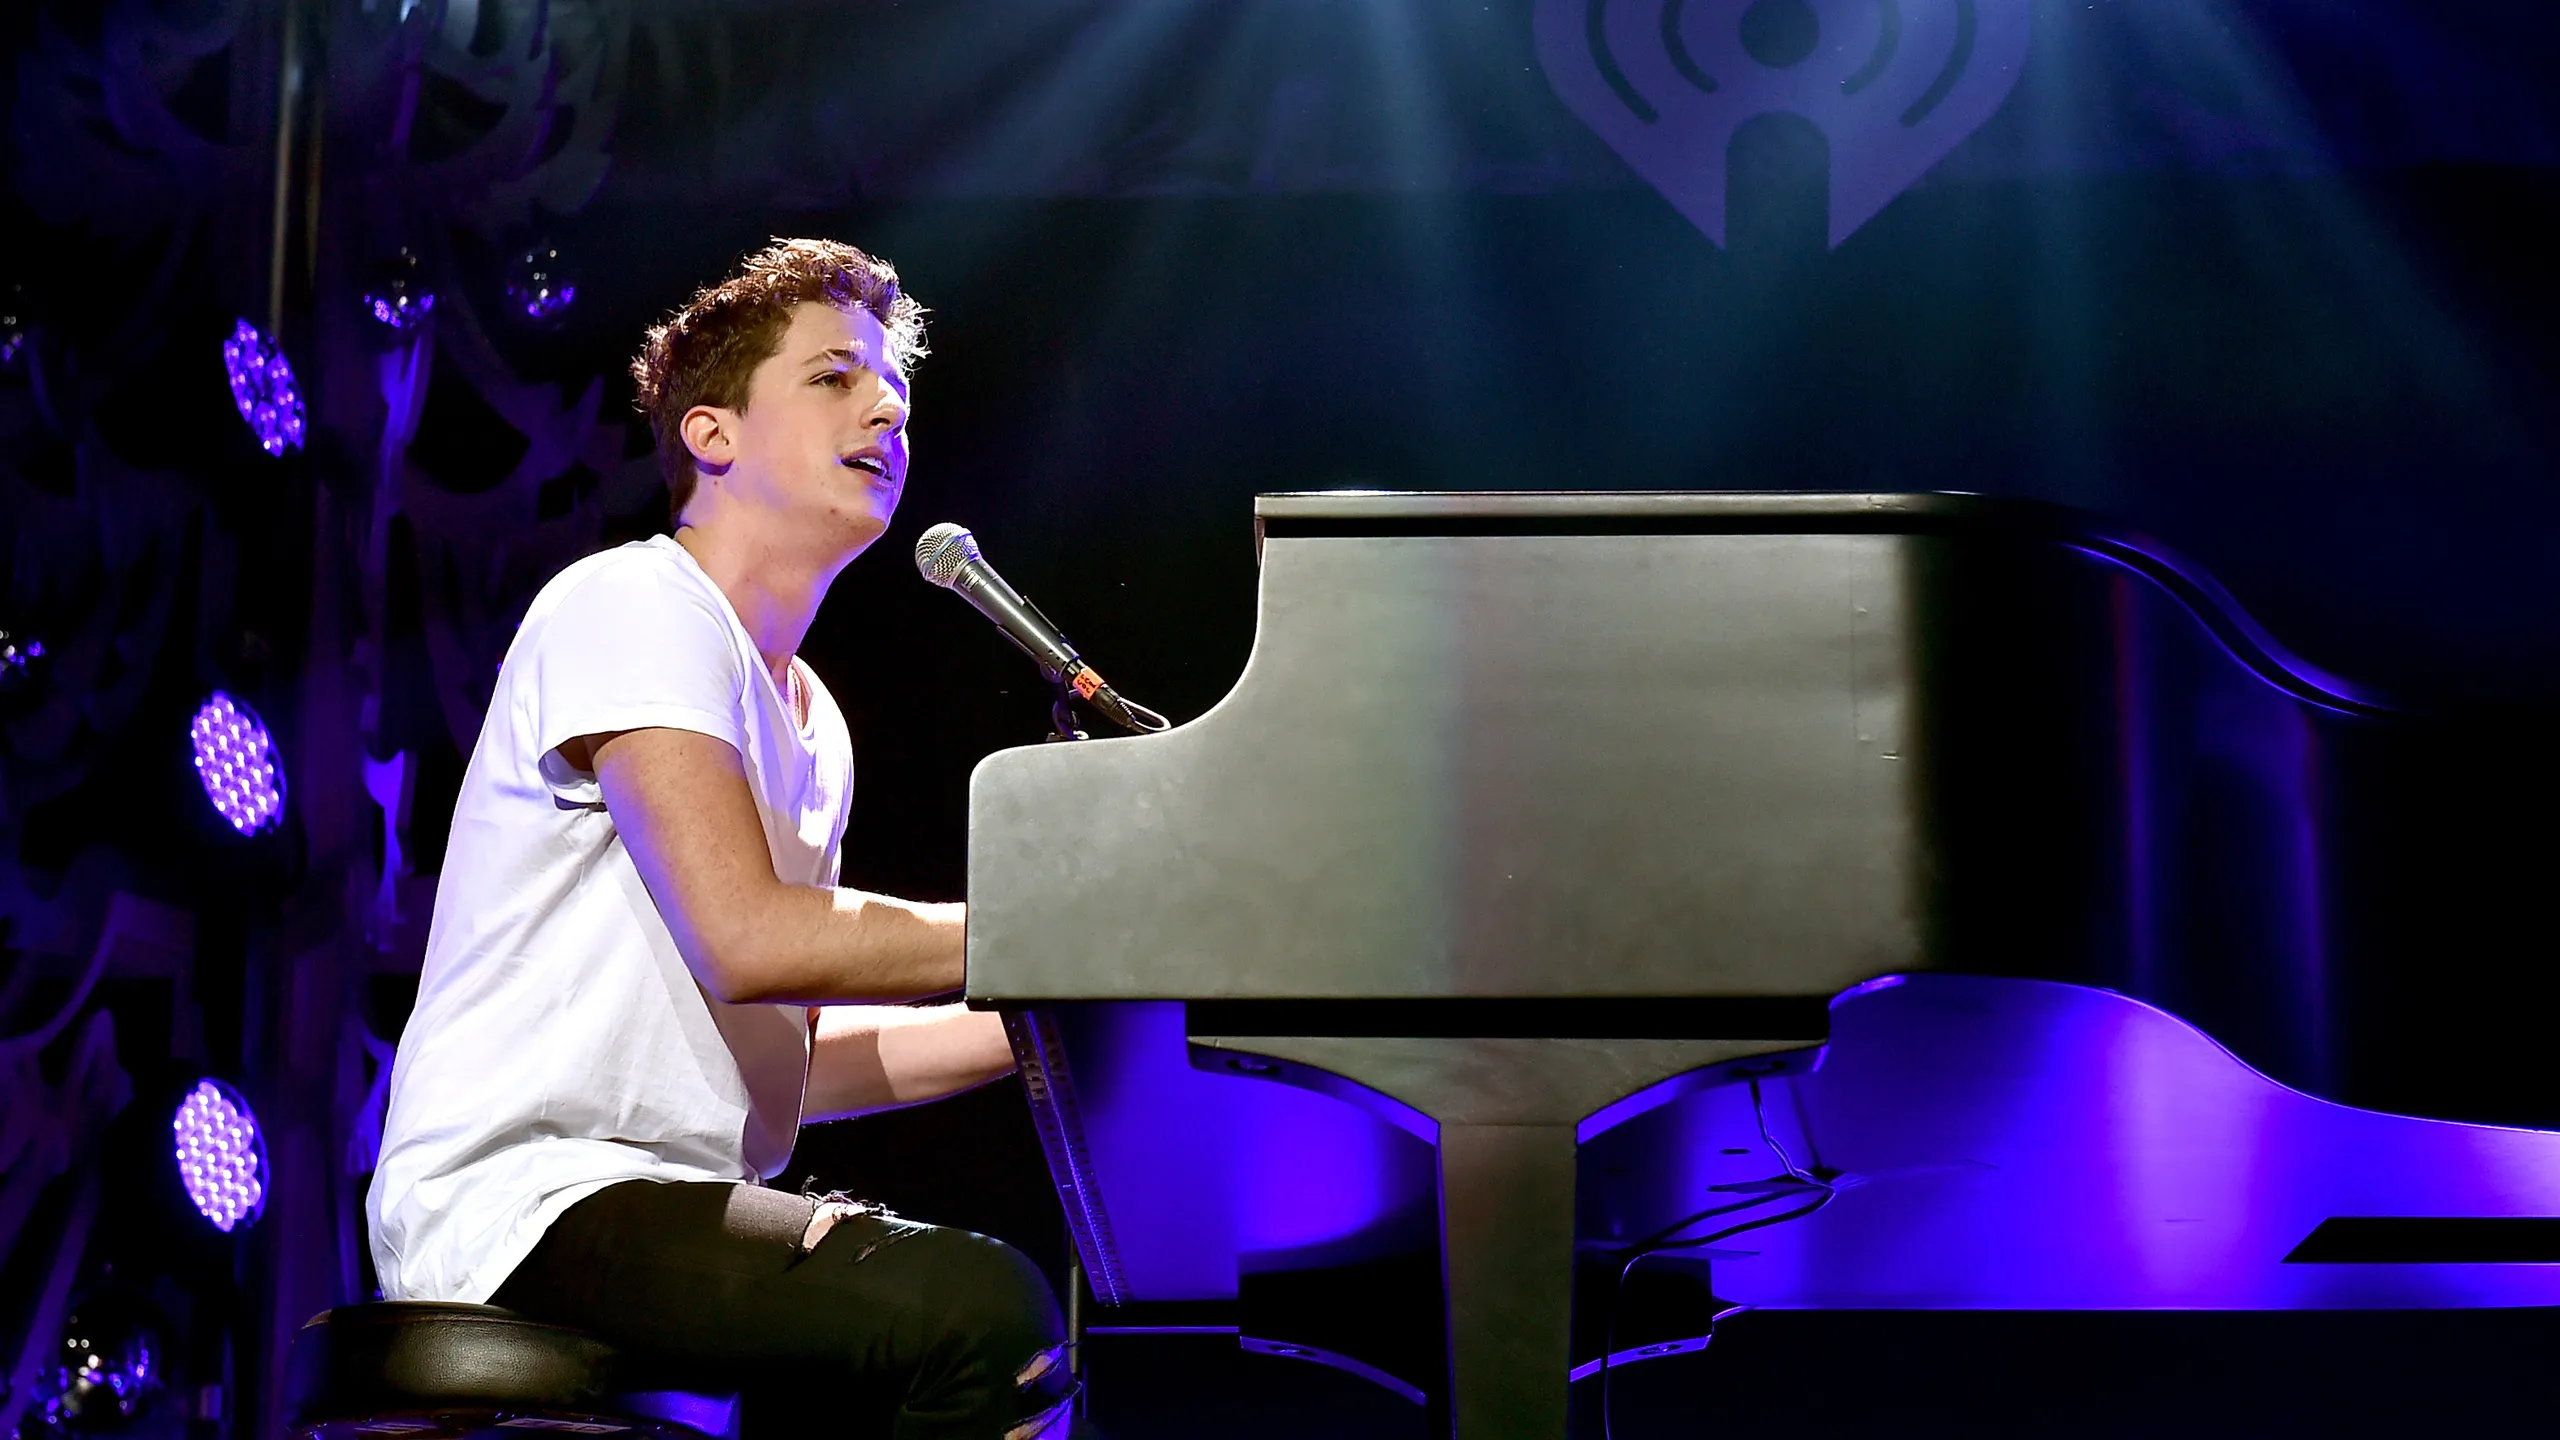 Charlie Puth Supports And Invites Street Performer After Piano Incident